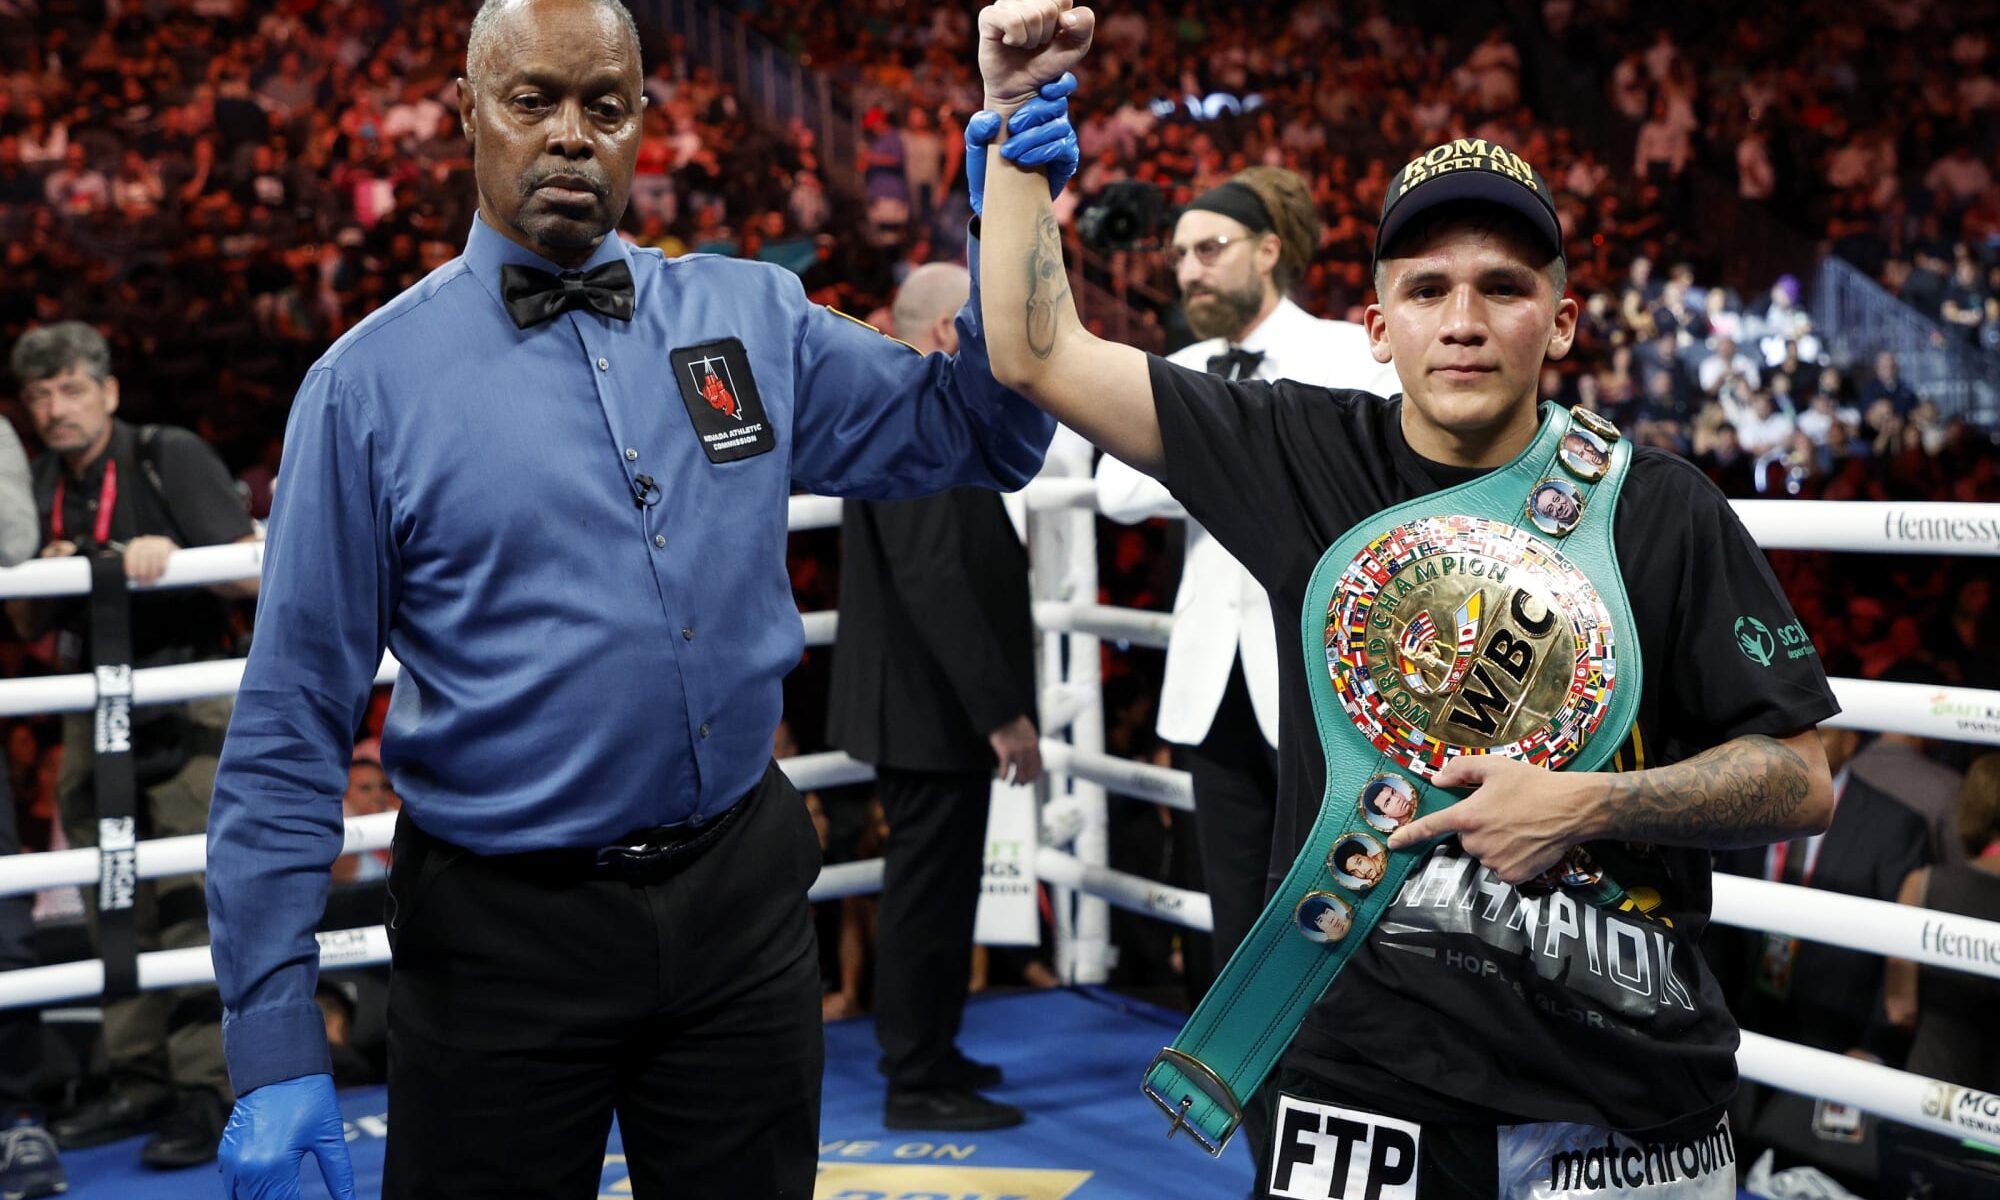 Jesse Rodriguez earns unanimous decision on Canelo-GGG 3 card